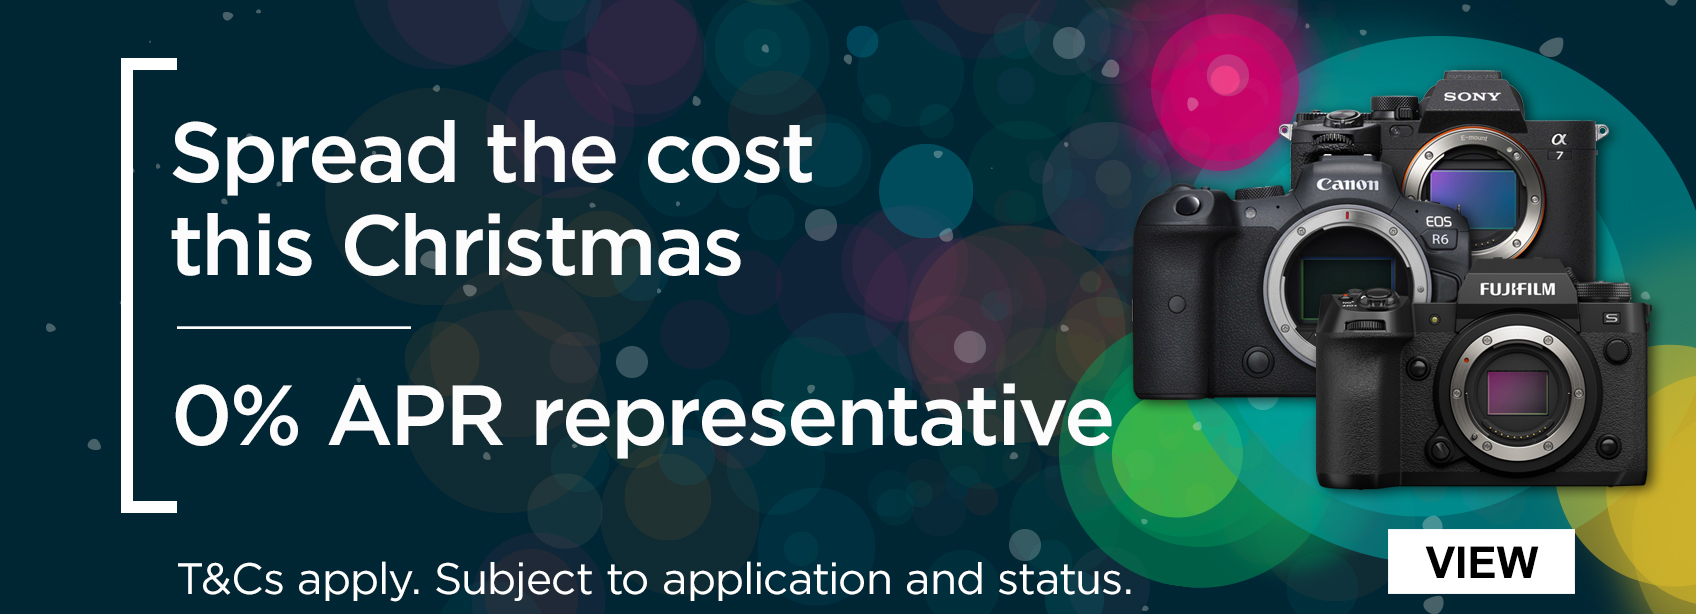 Spread the cost this Christmas. 0% APR representative. T&Cs apply. Subject to application and status. 